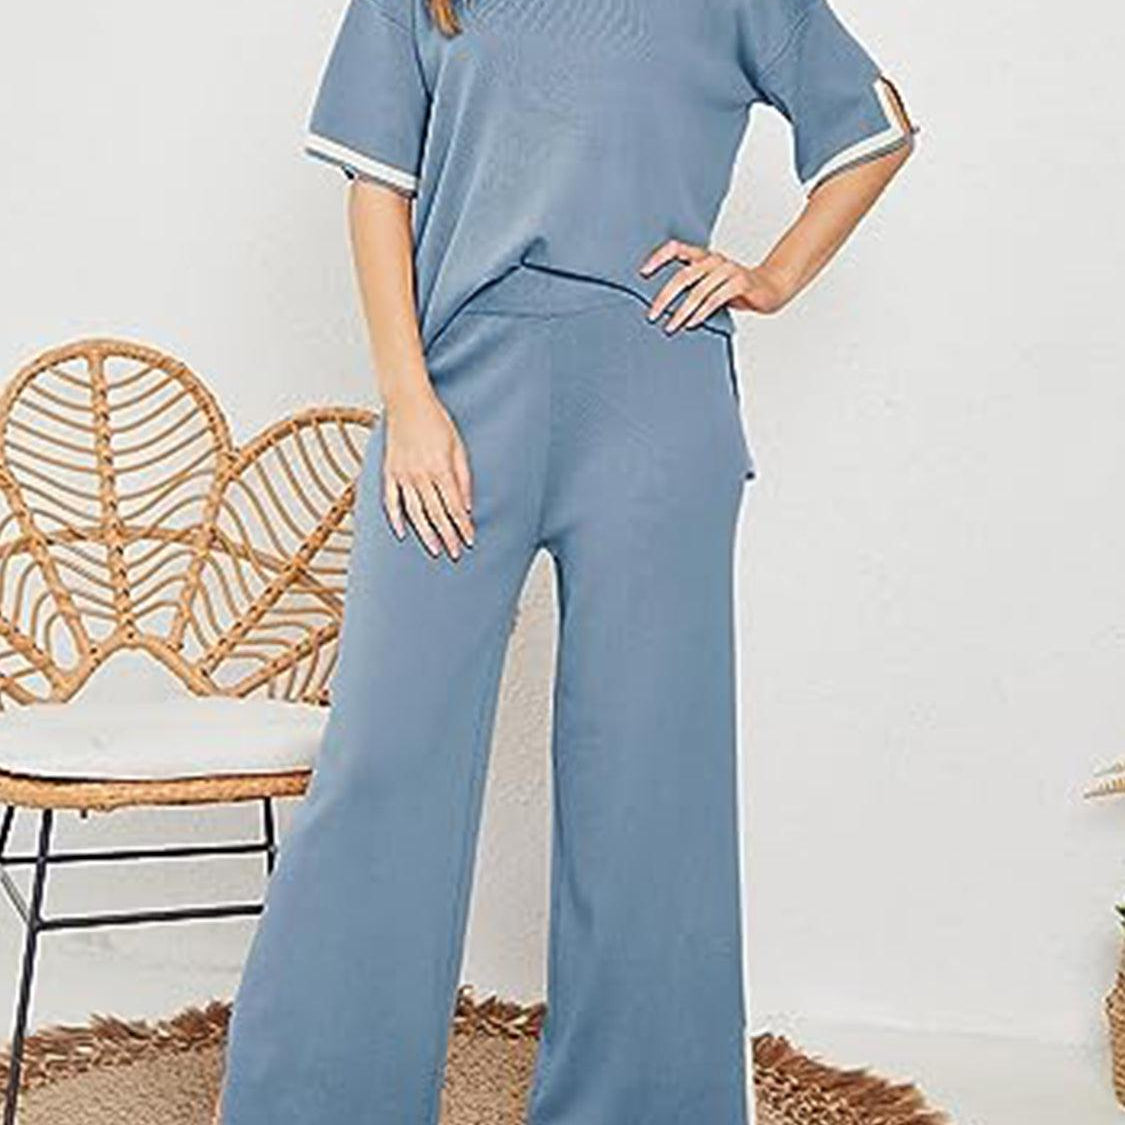 Women's Outfits & Sets Contrast High-Low Sweater and Knit Pants Set